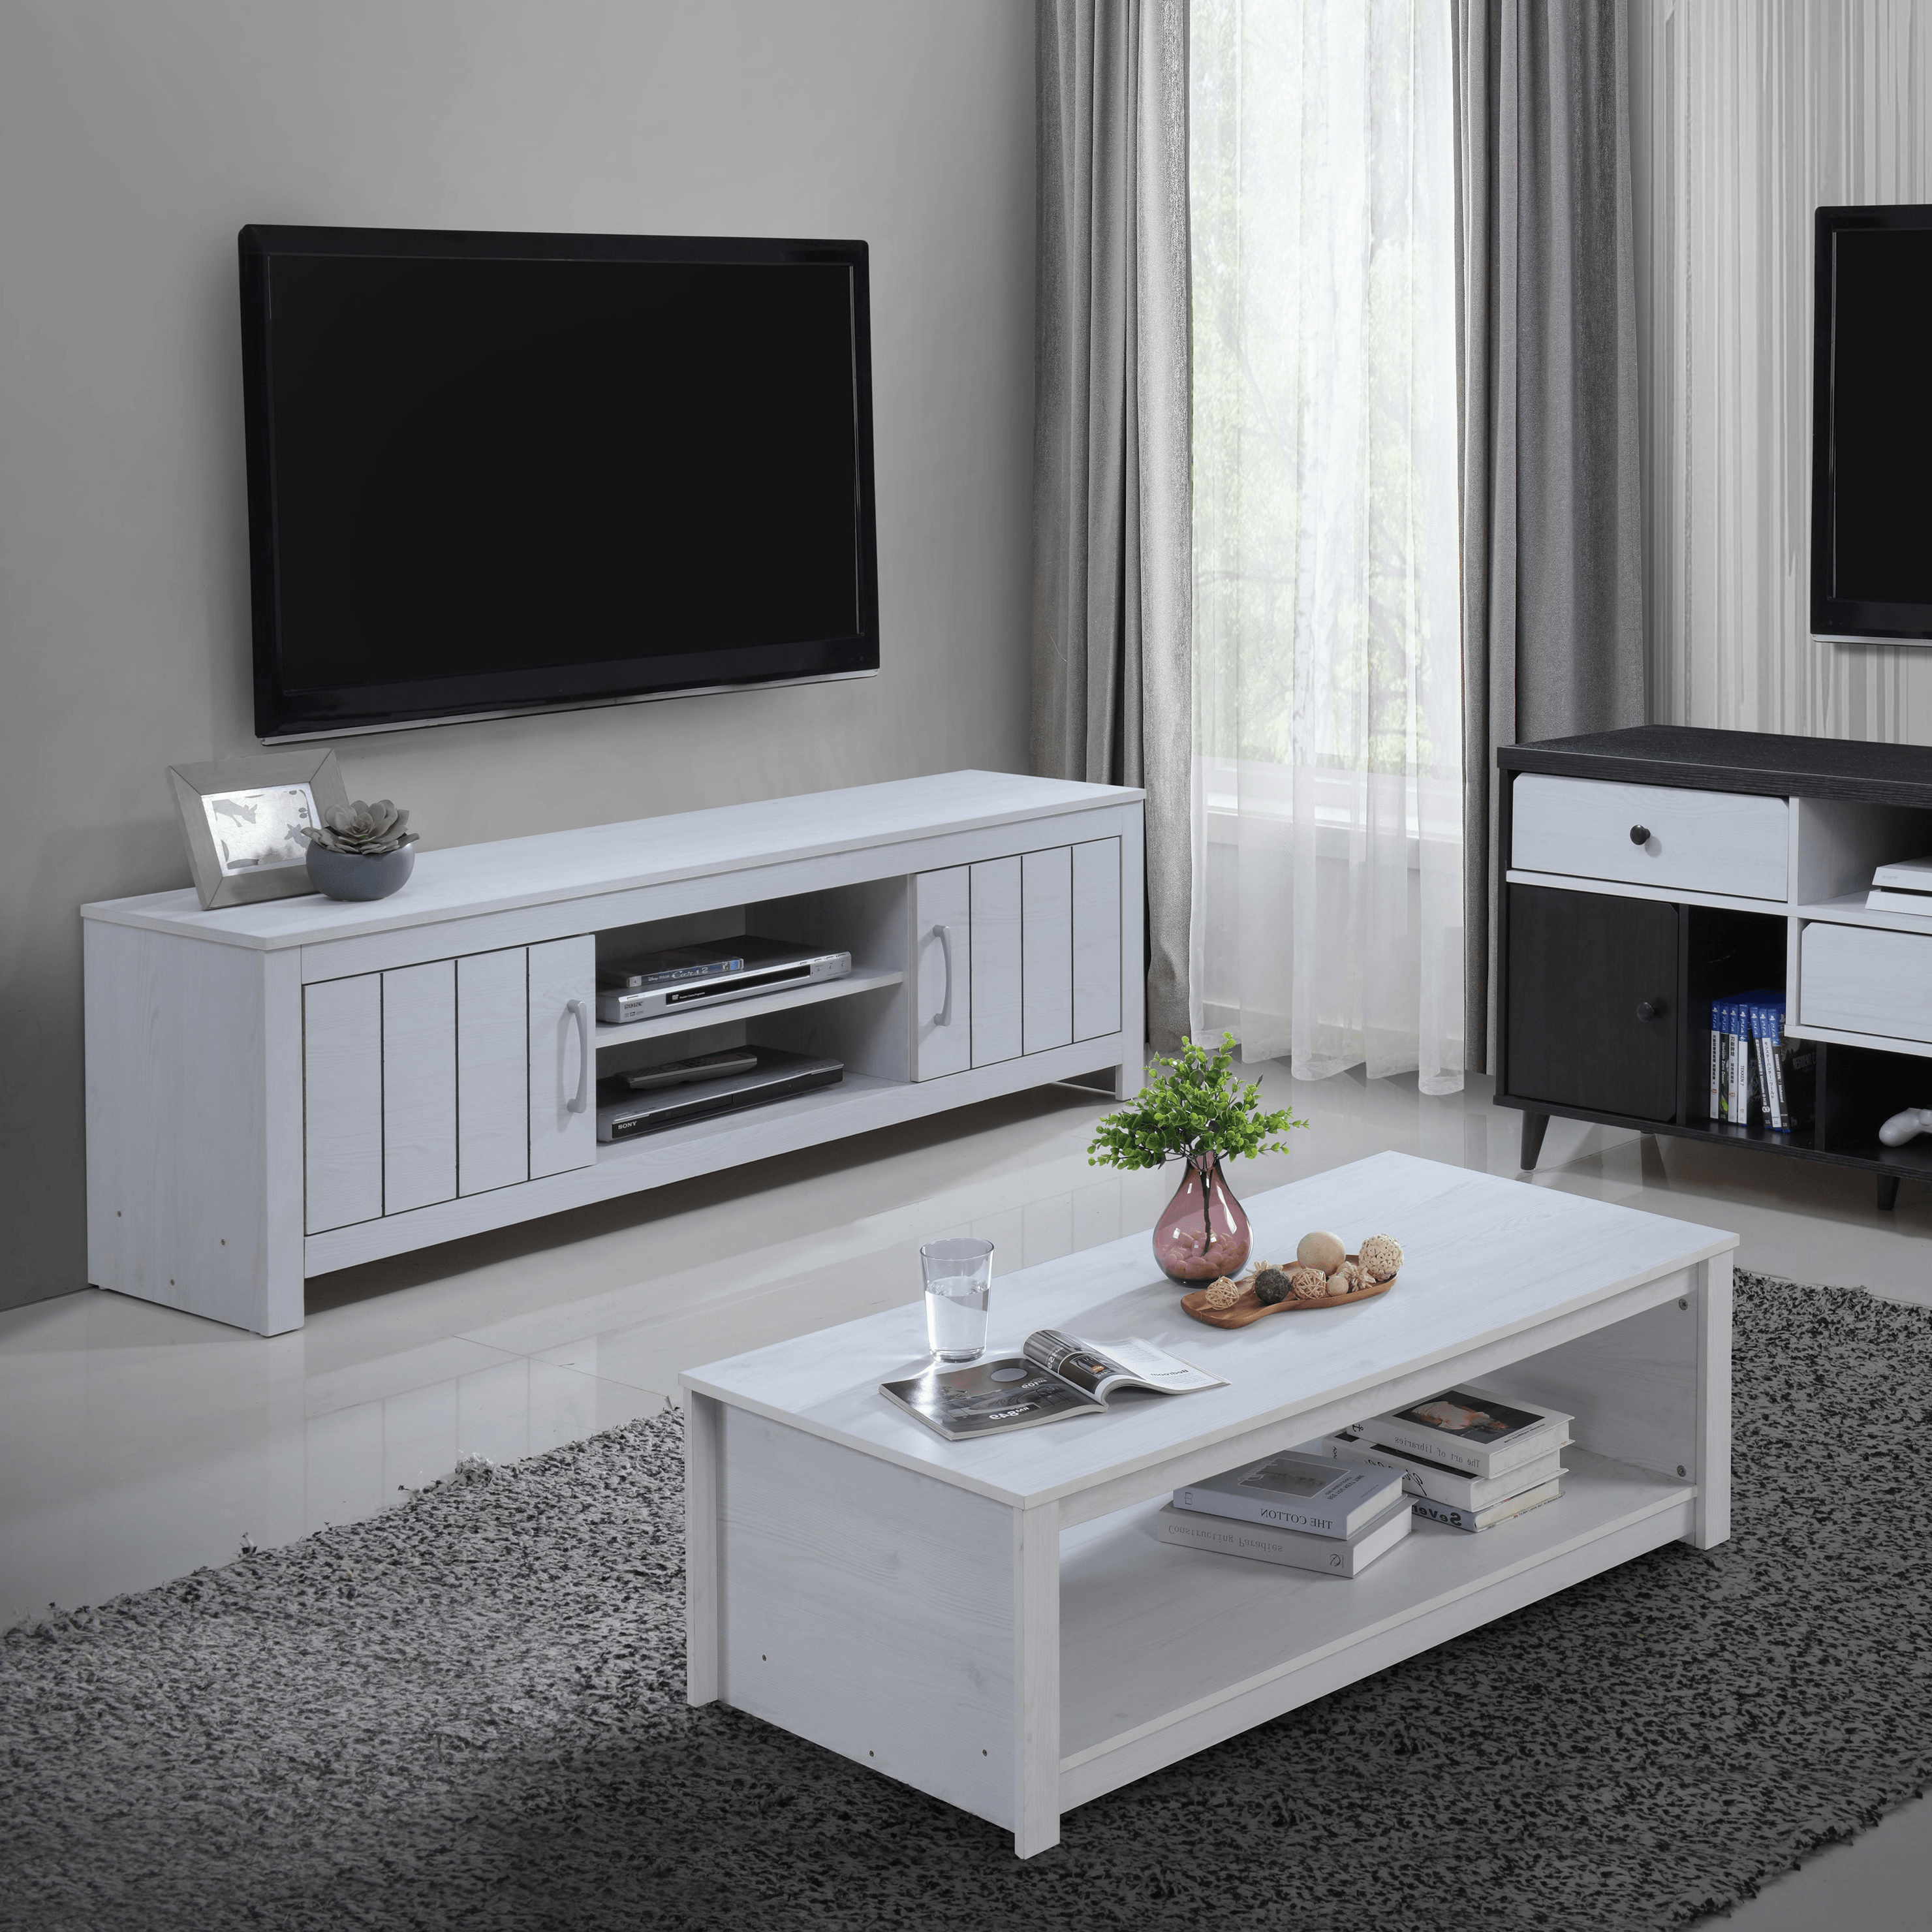 Miami TV Unit and Coffee Table Set